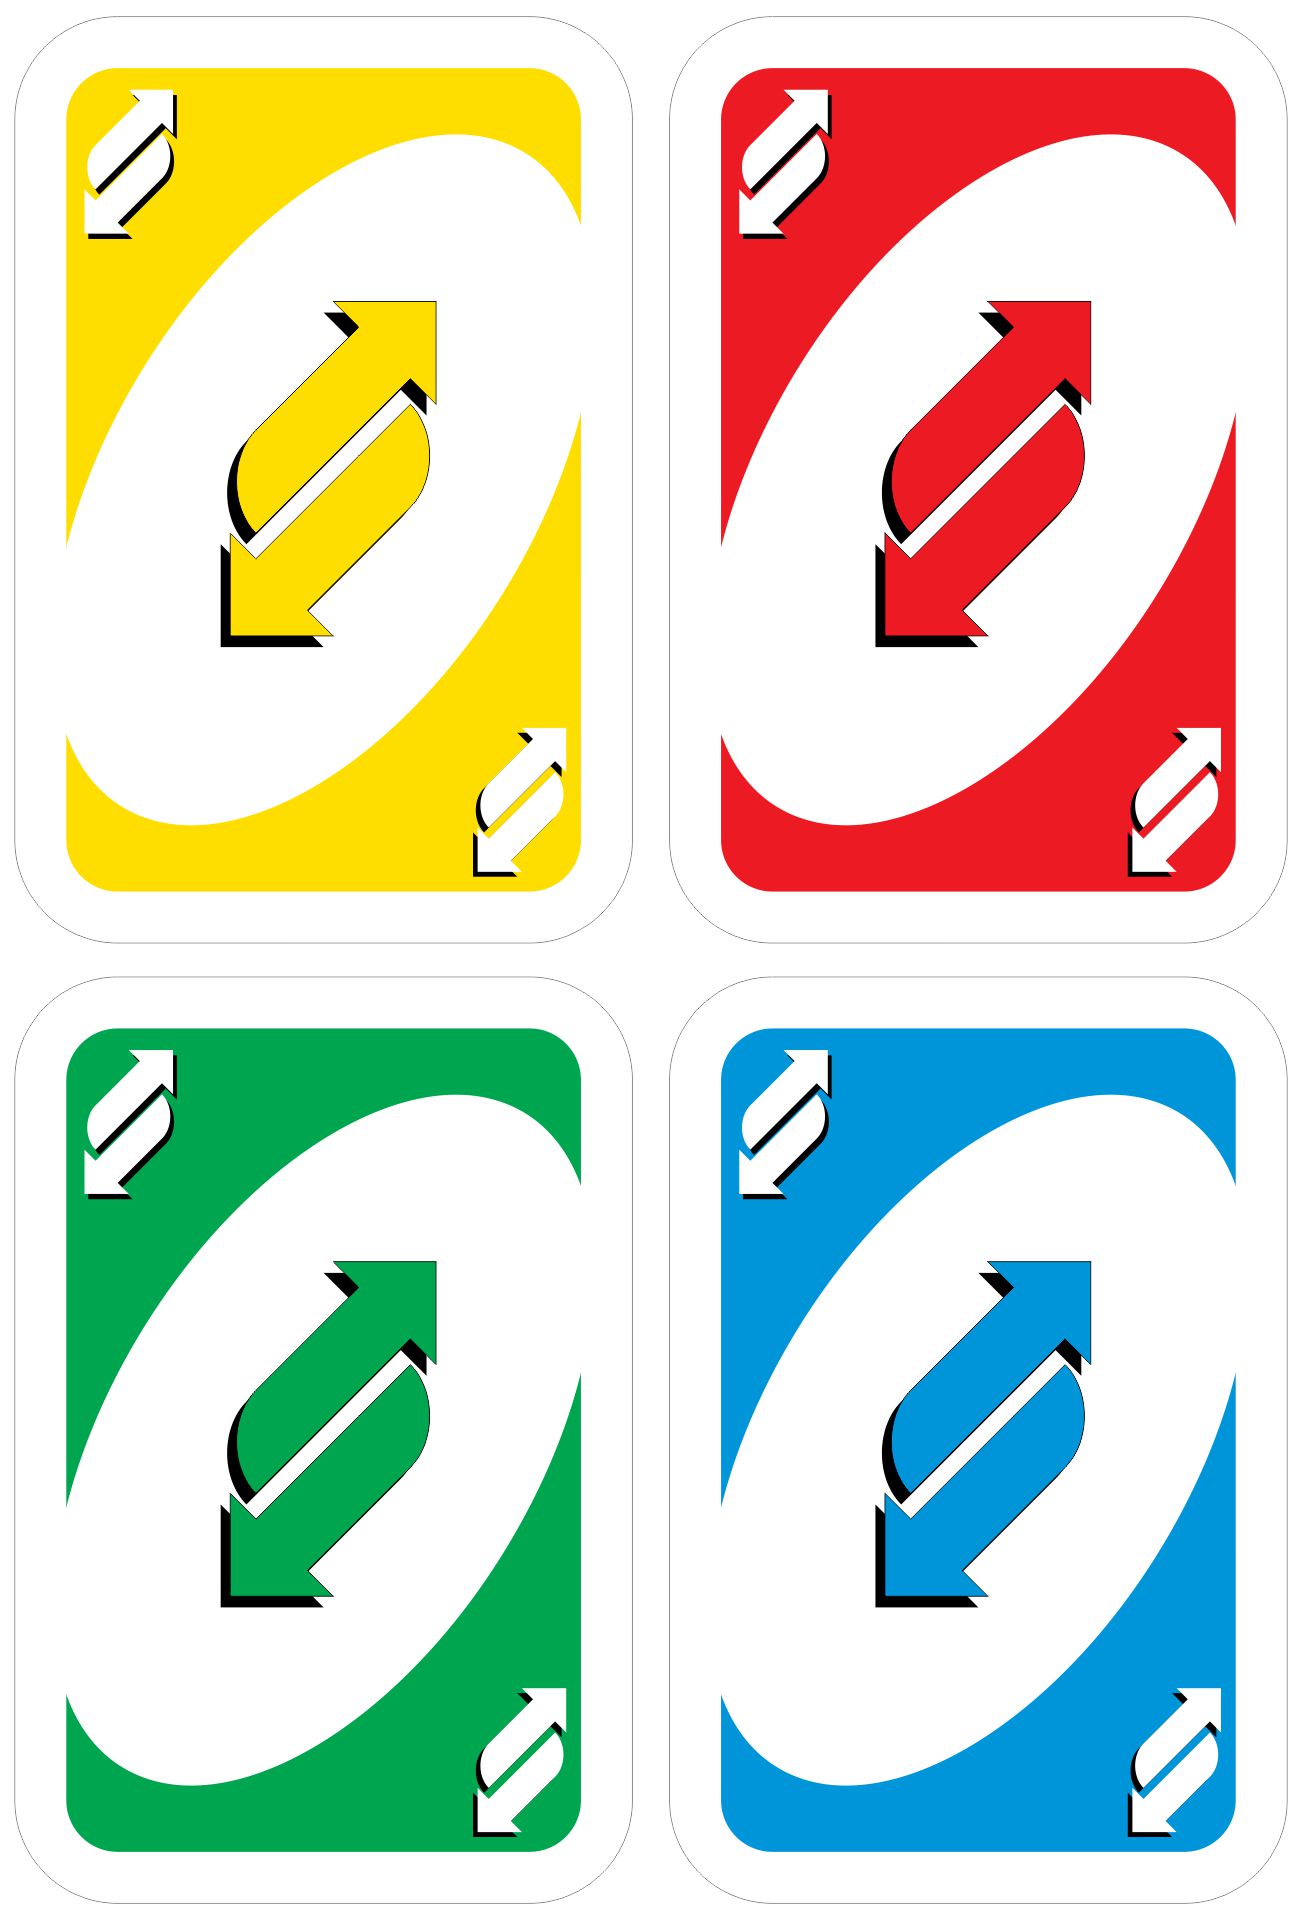 Uno Deck With Only Reverse Cards